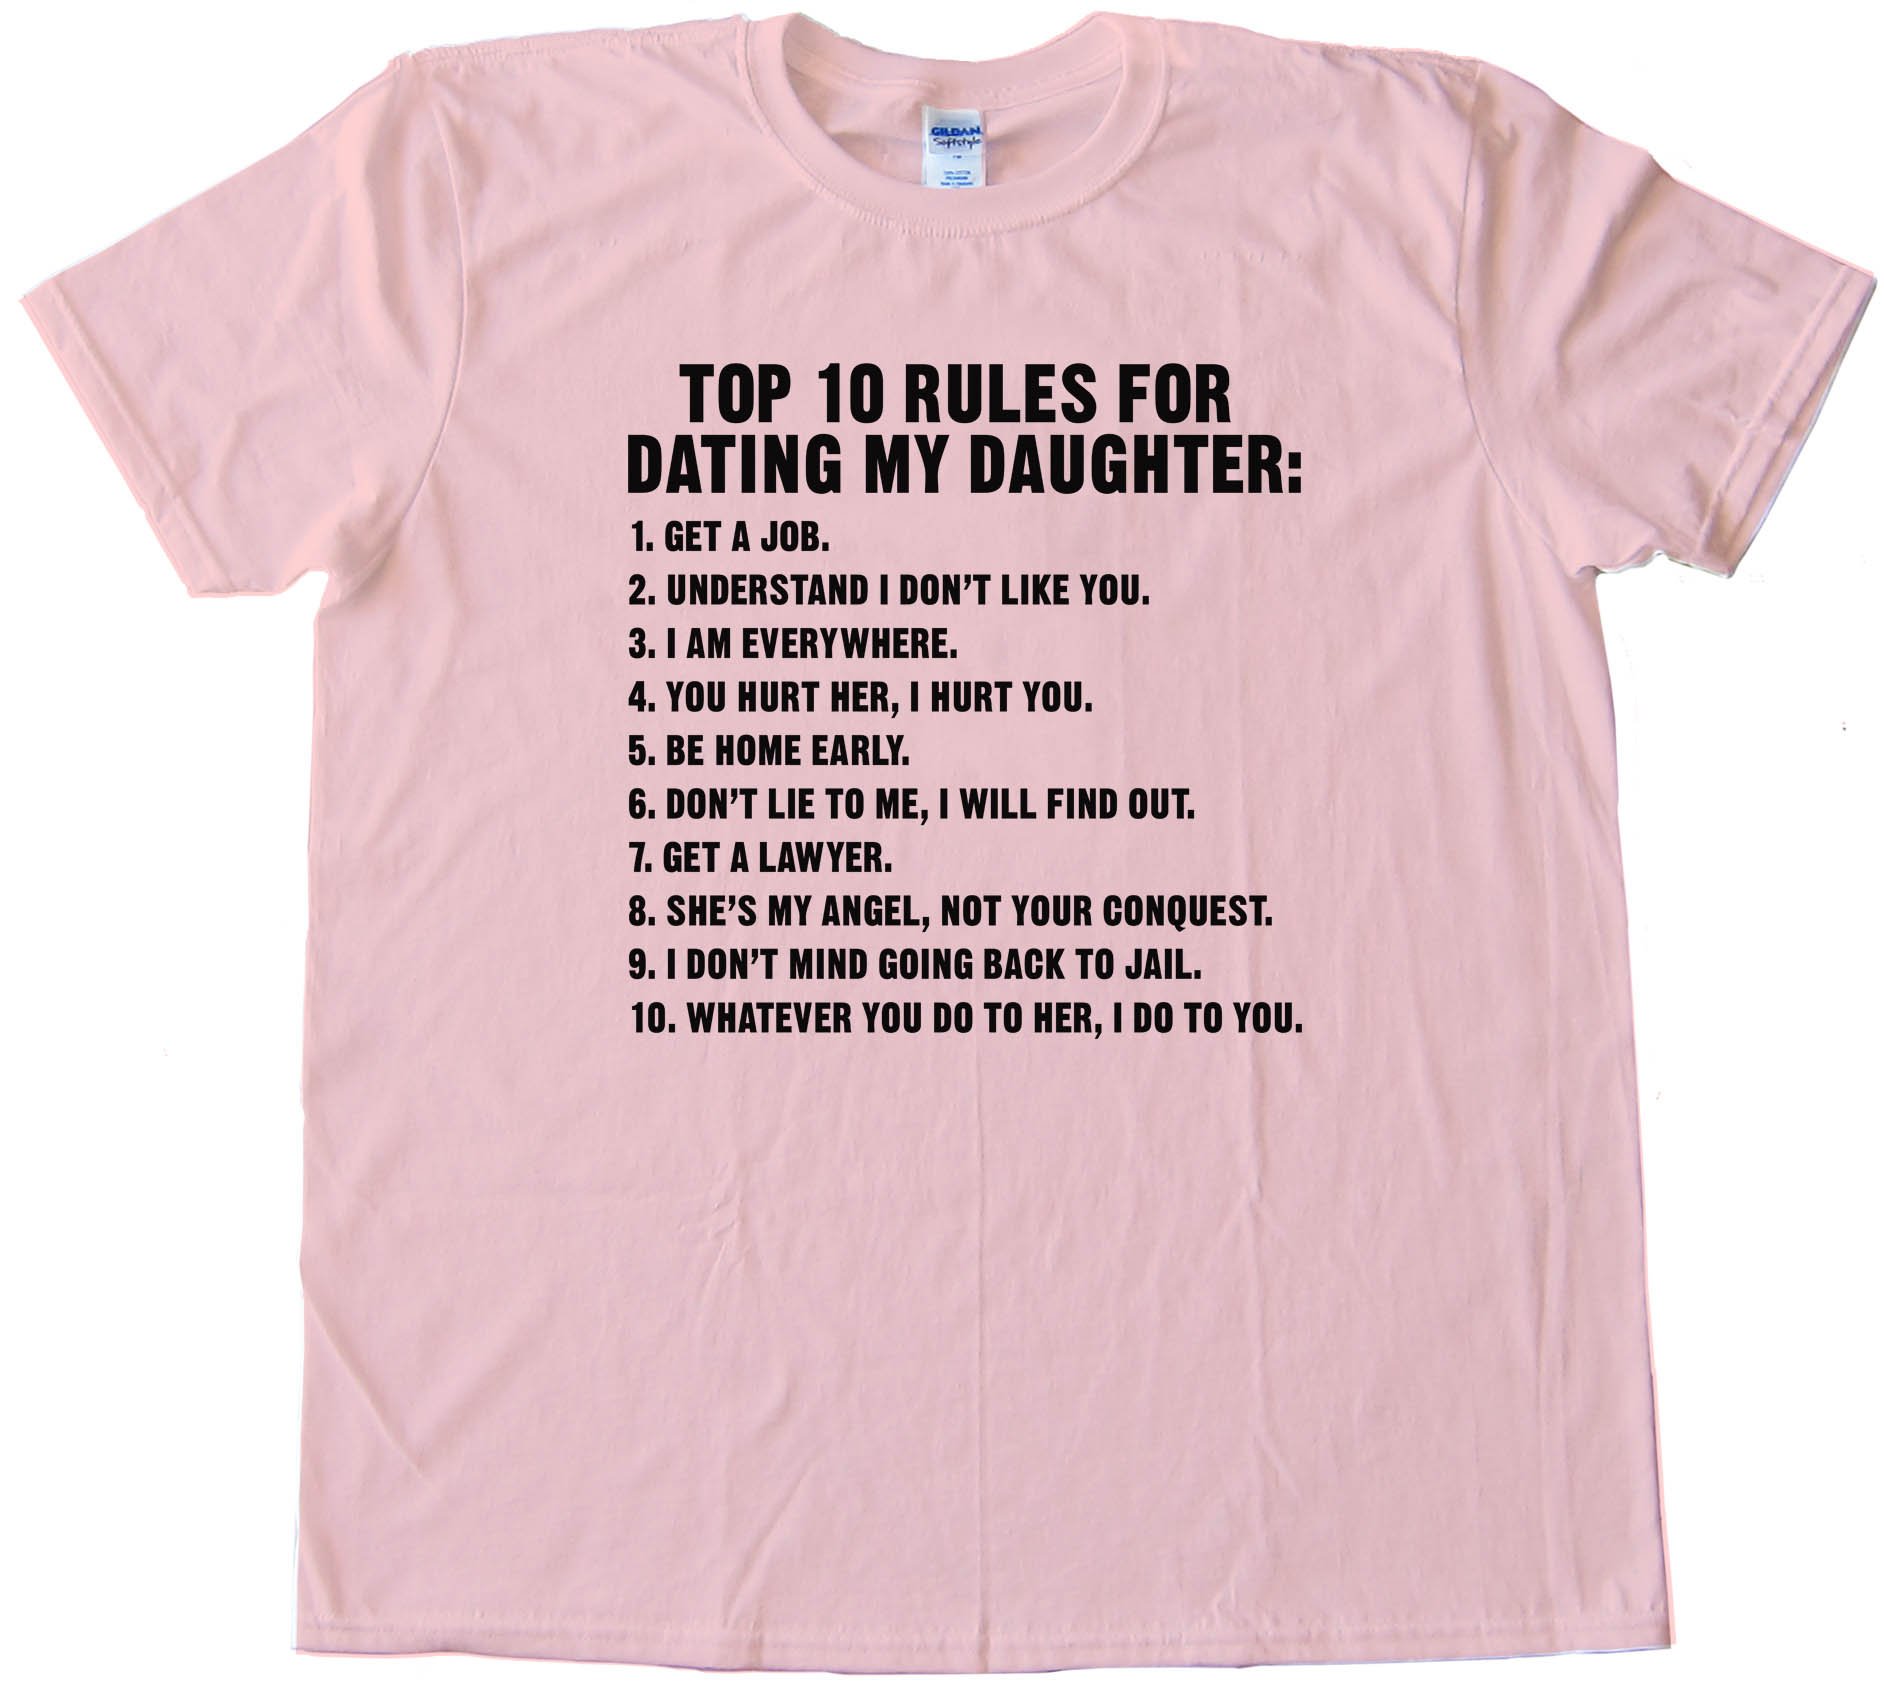 Top 10 Rules For Dating My Daughter - Tee Shirt